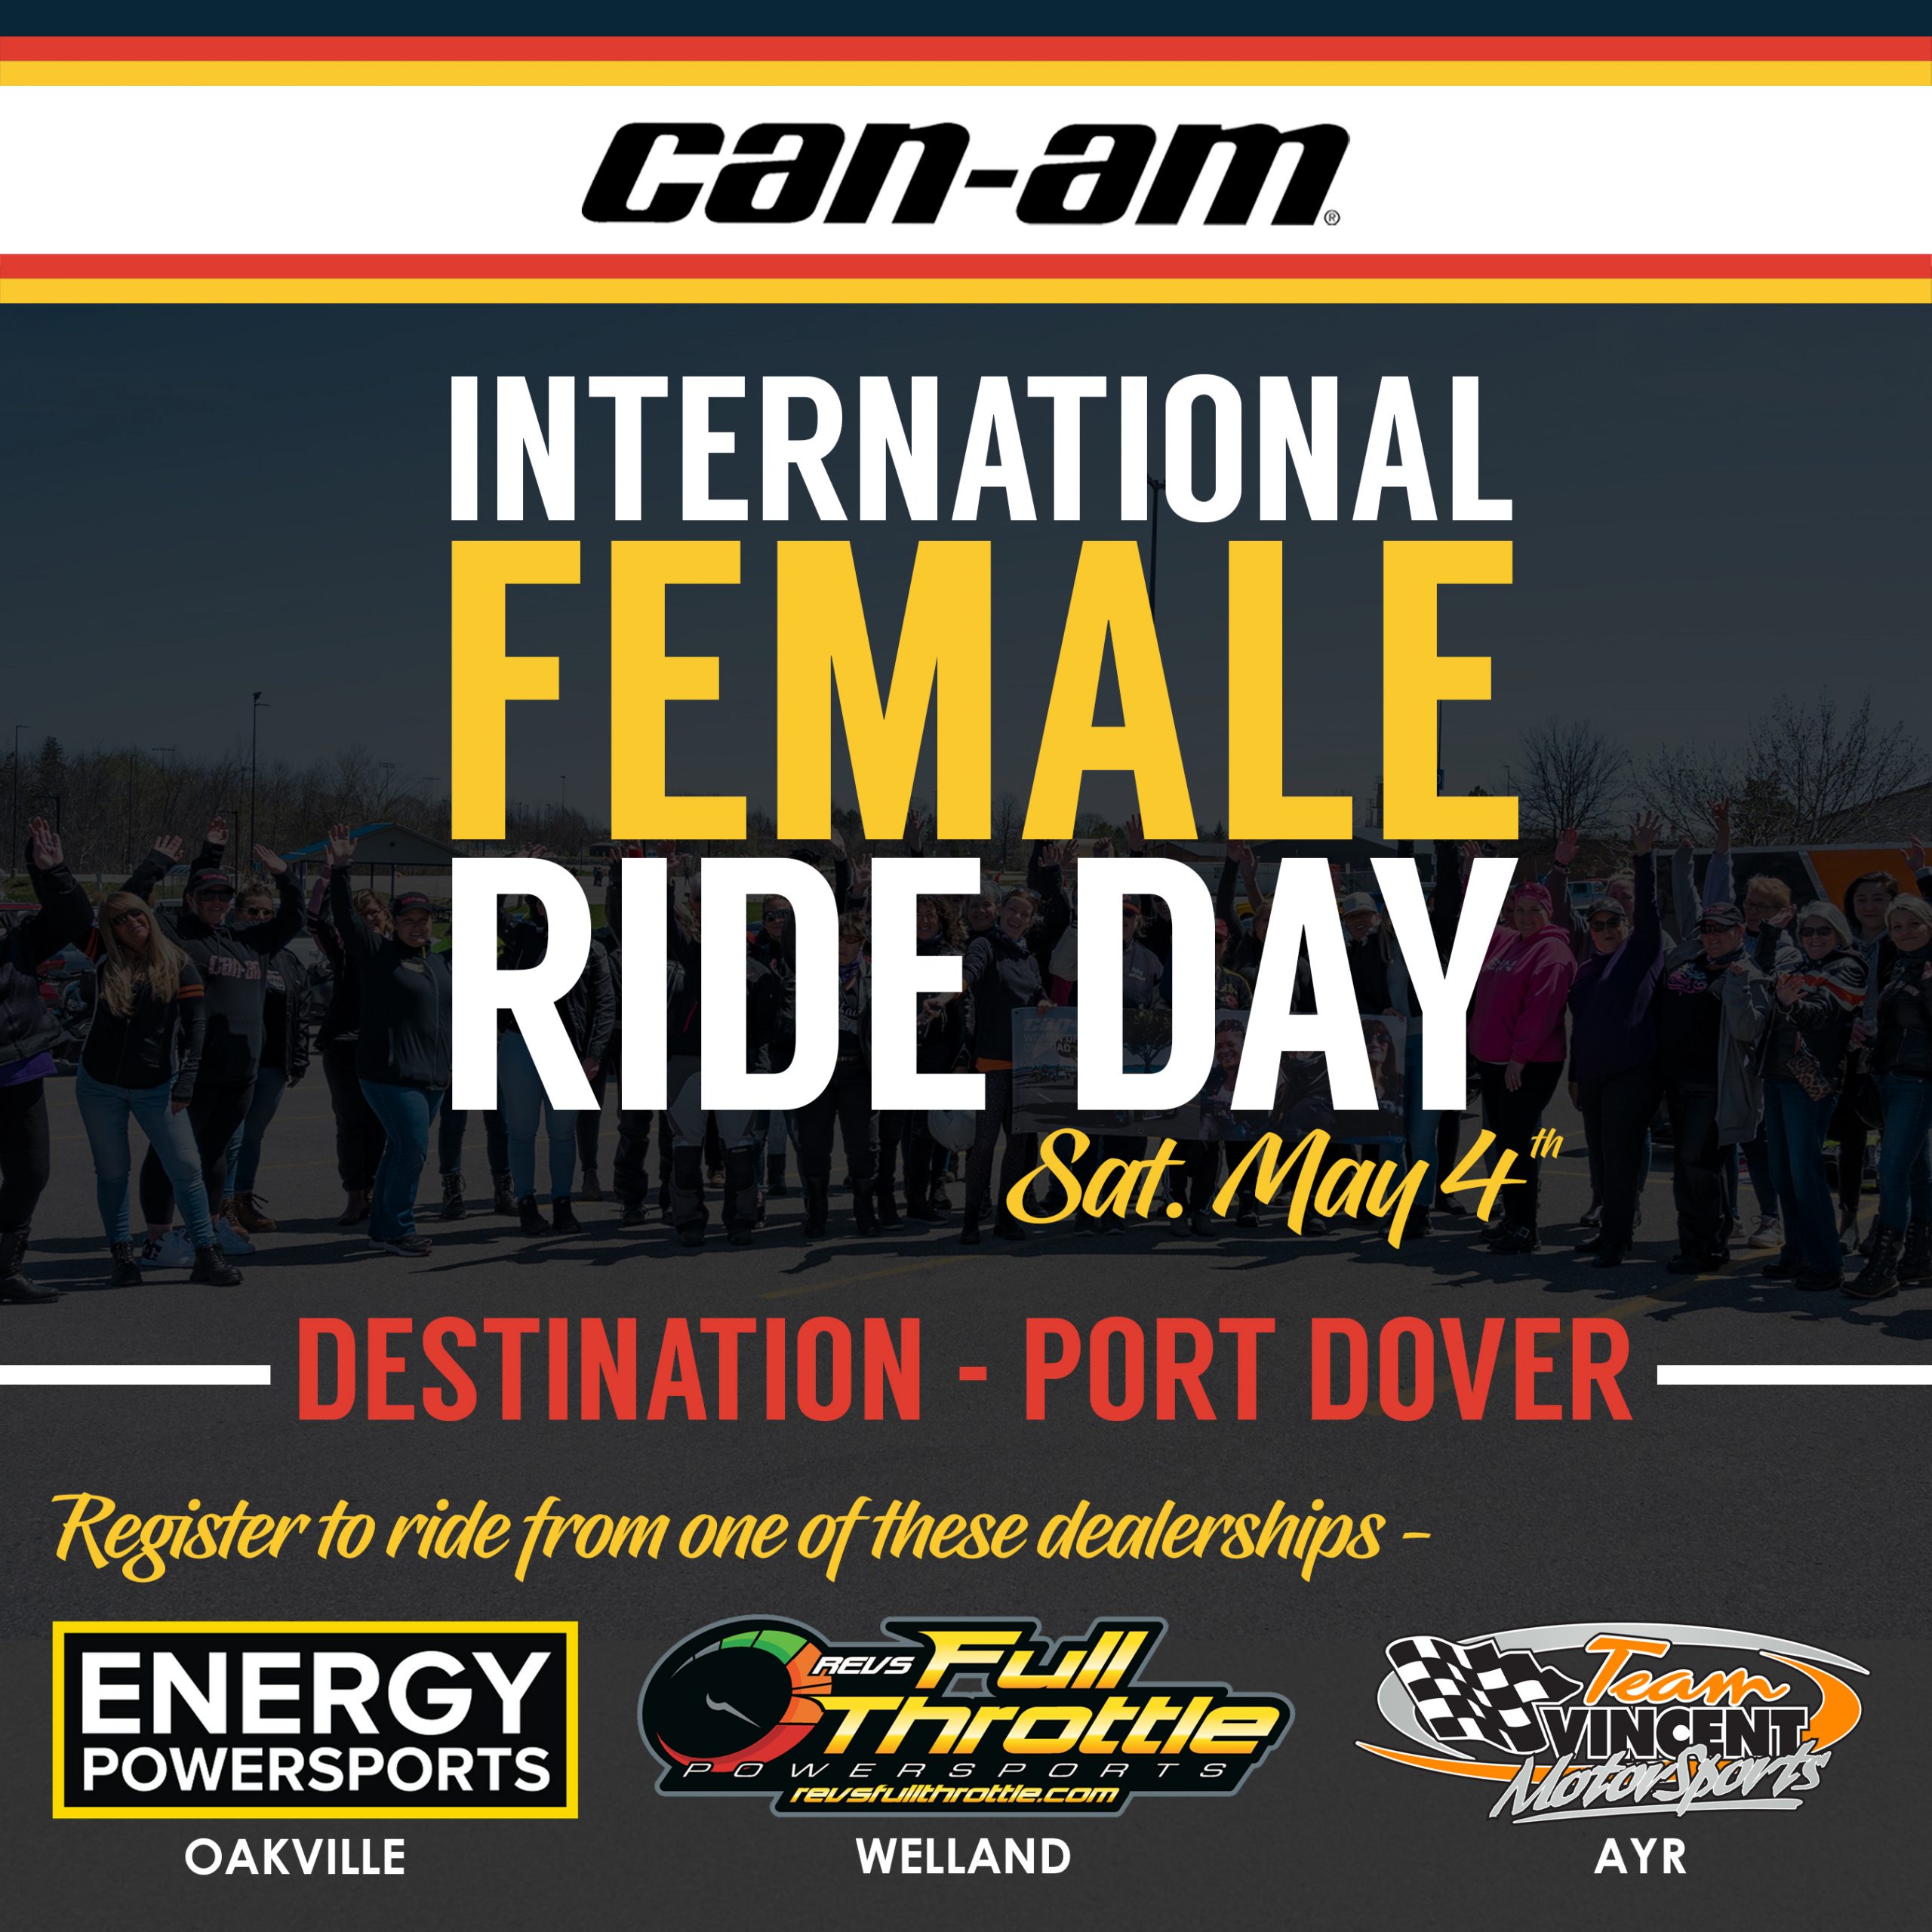 Come join us for Can-Am’s INTERNATIONAL FEMALE RIDE DAY